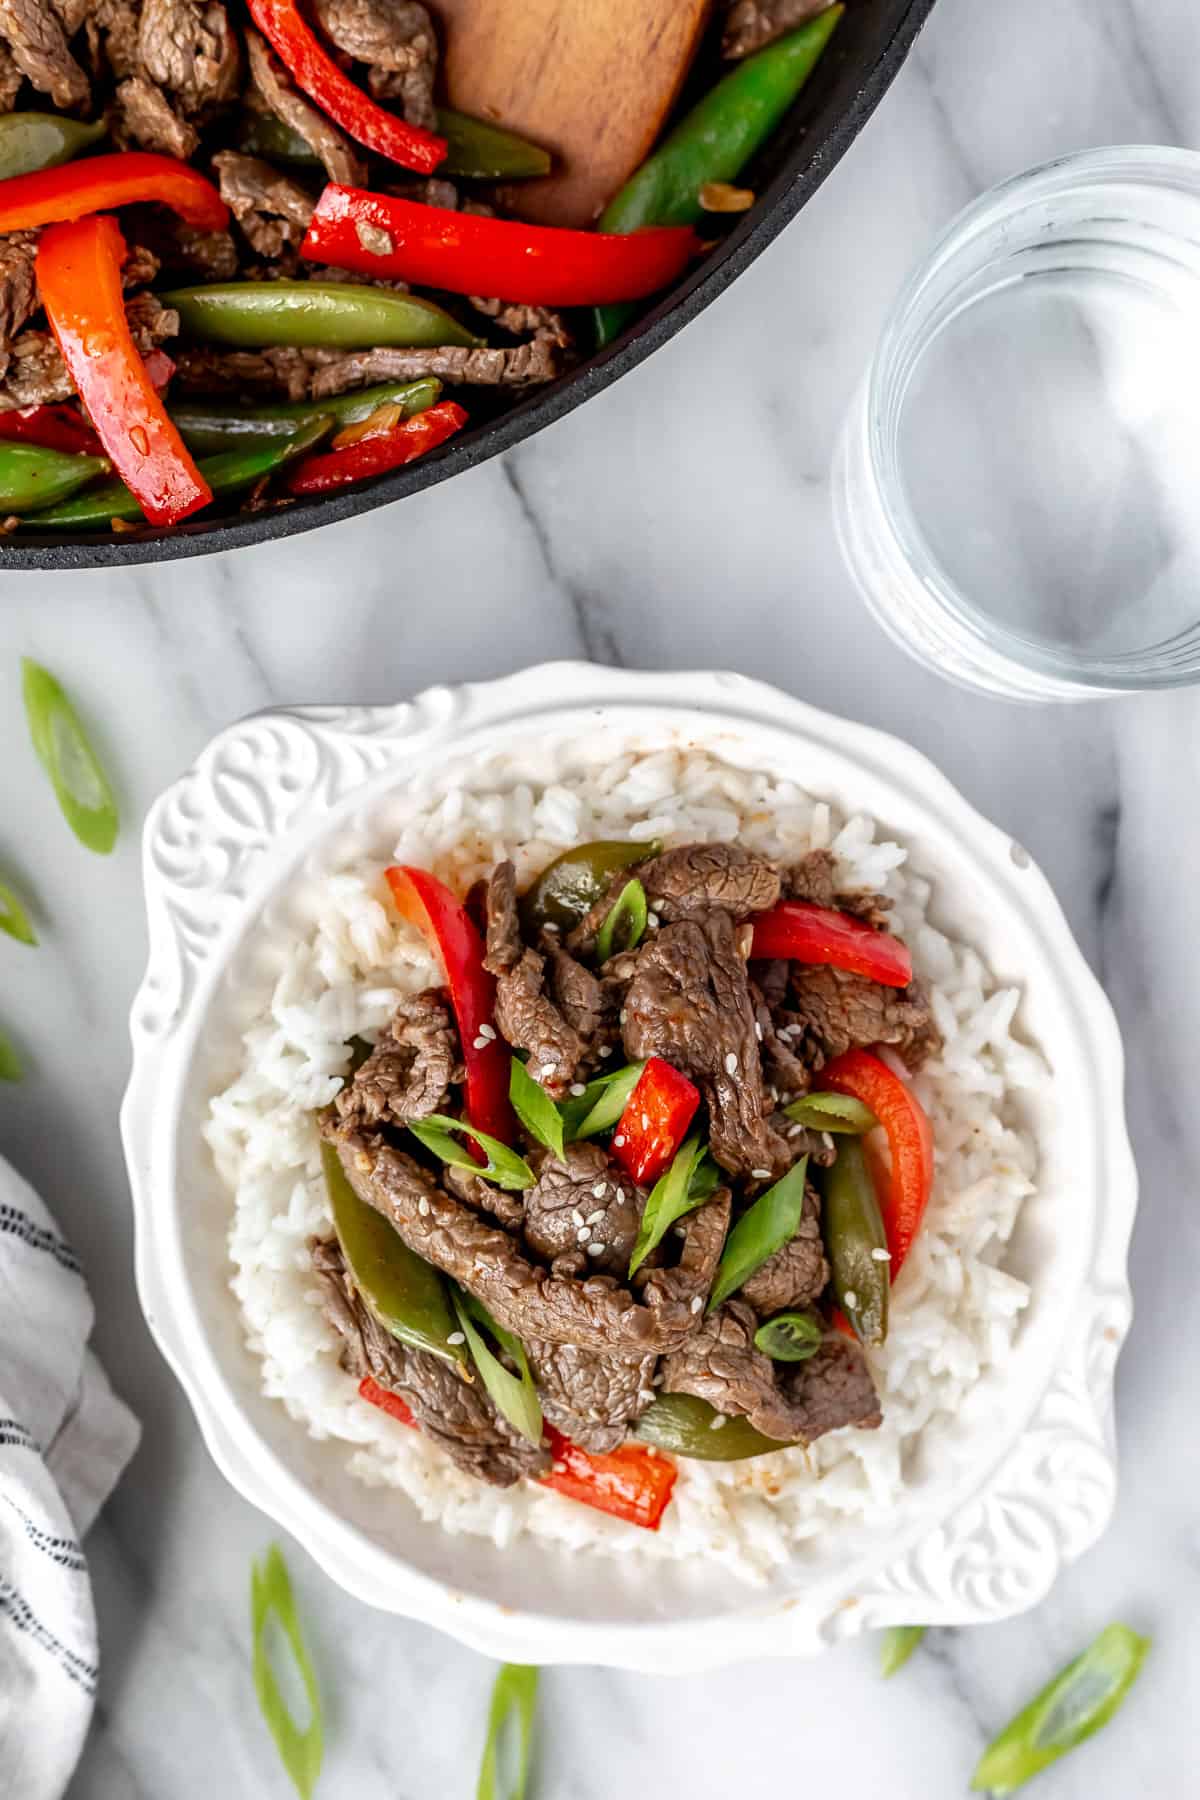 Overhead view of ginger beef stir fry with sugar snap peas and red peppers in a white bowl with rice with a skillet and glass of water partially showing in the background.